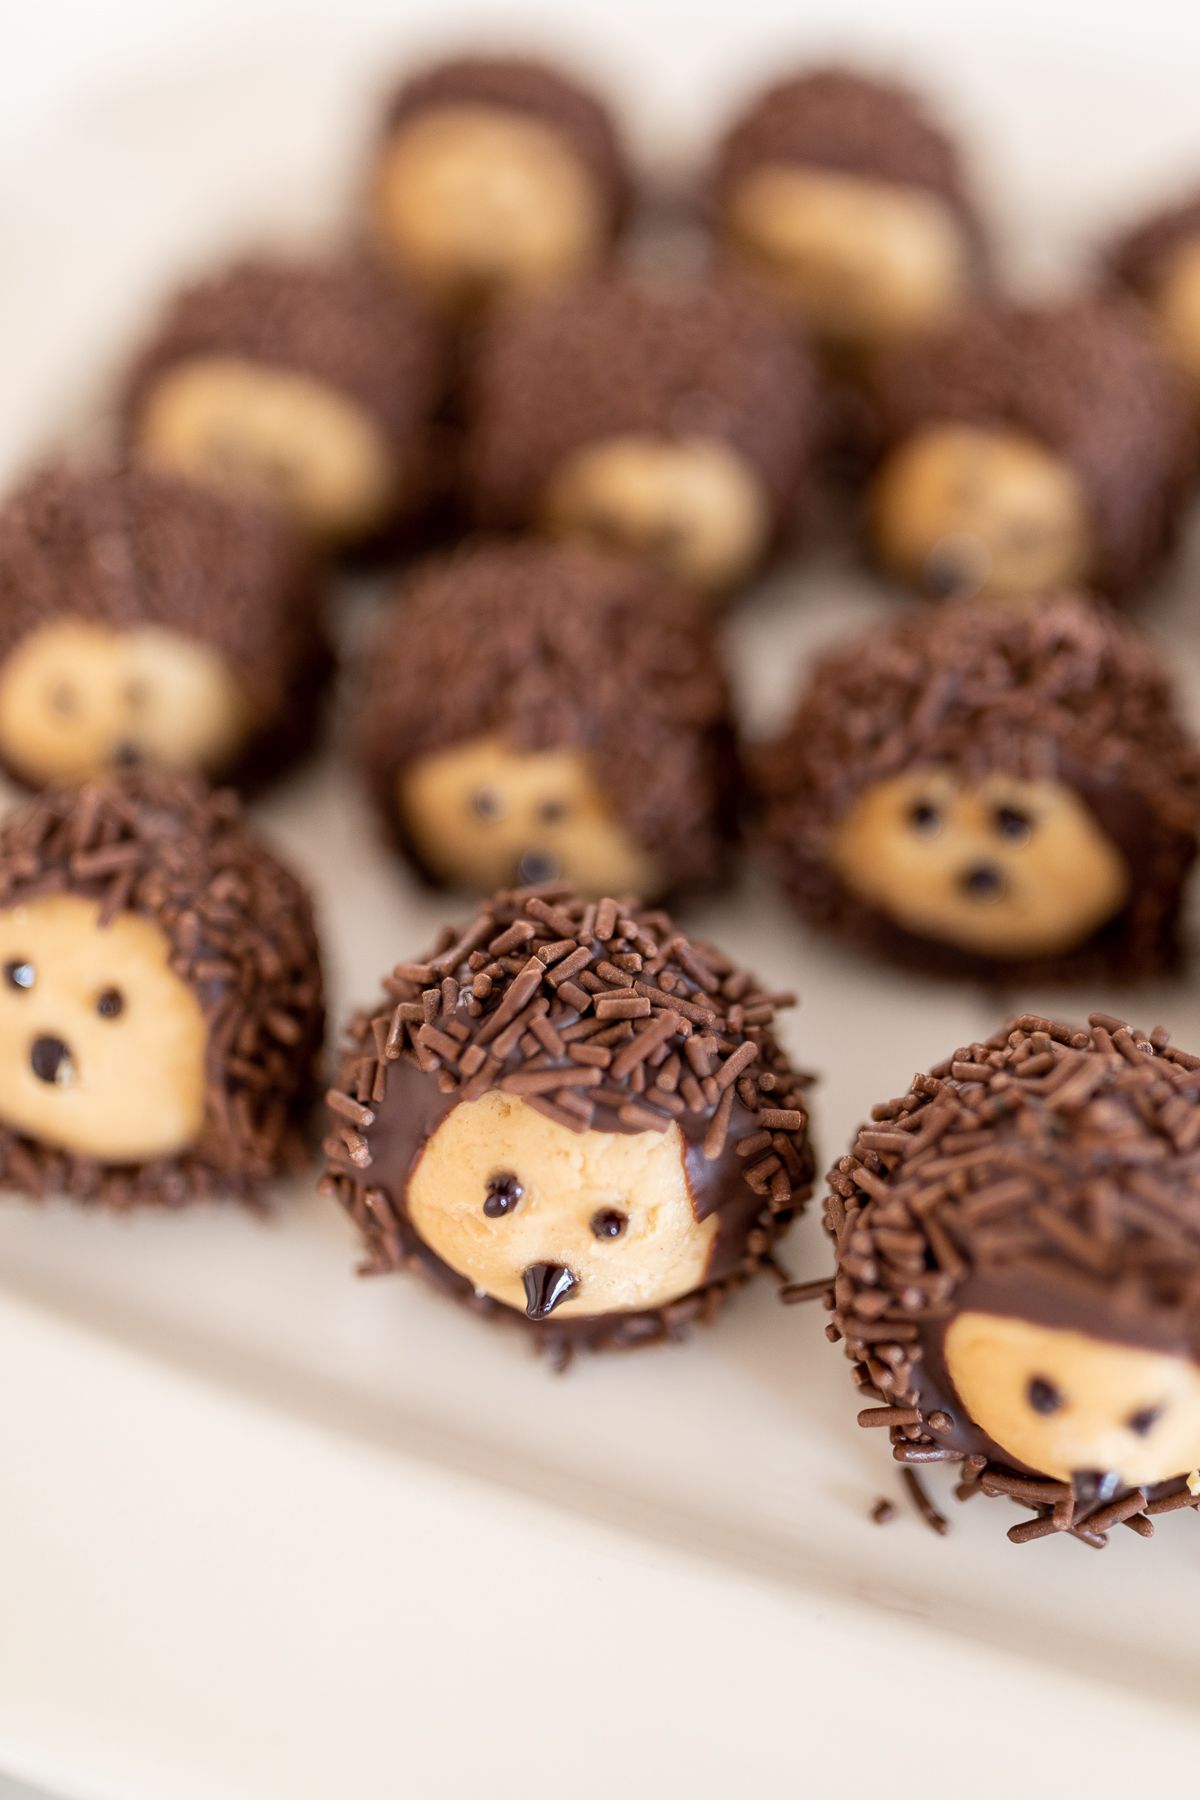 A group of peanut butter chocolate hedgehogs on a plate.